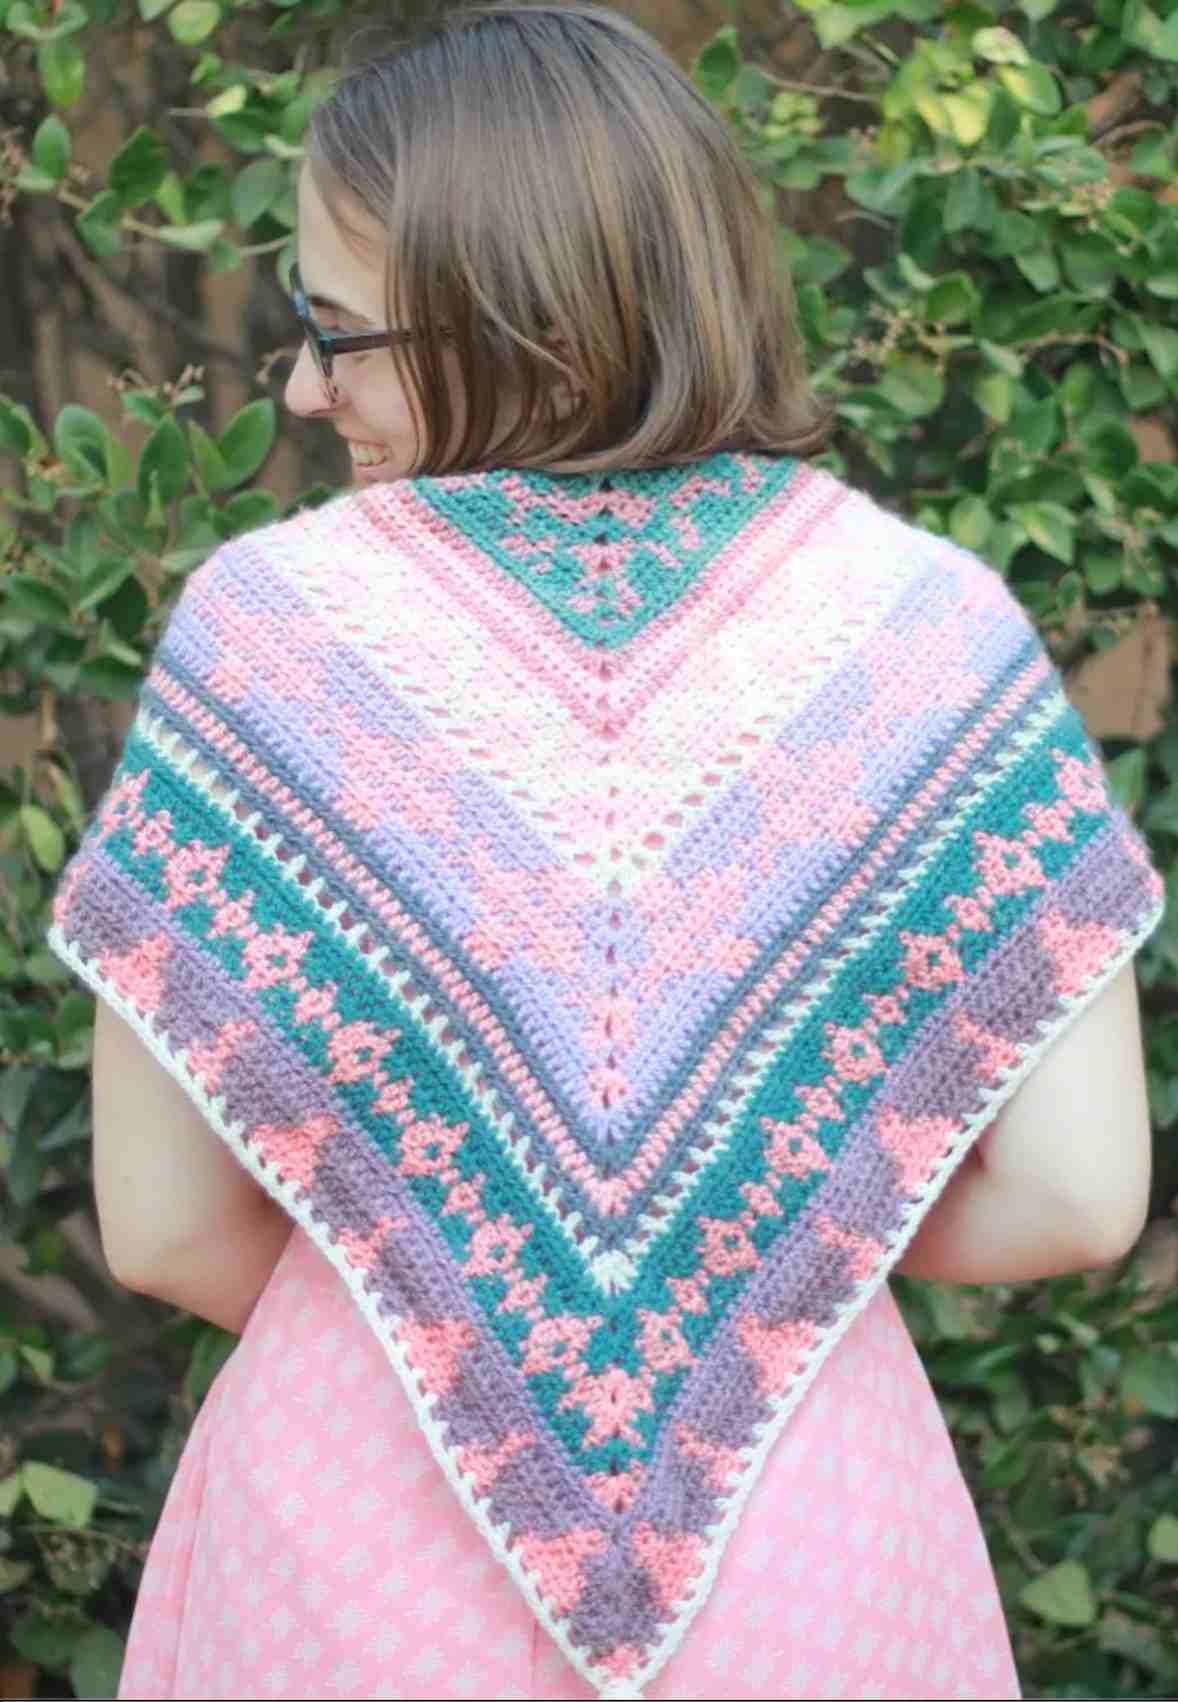 Happily Ever After Tapestry Crochet Shawl - Free Crochet Pattern